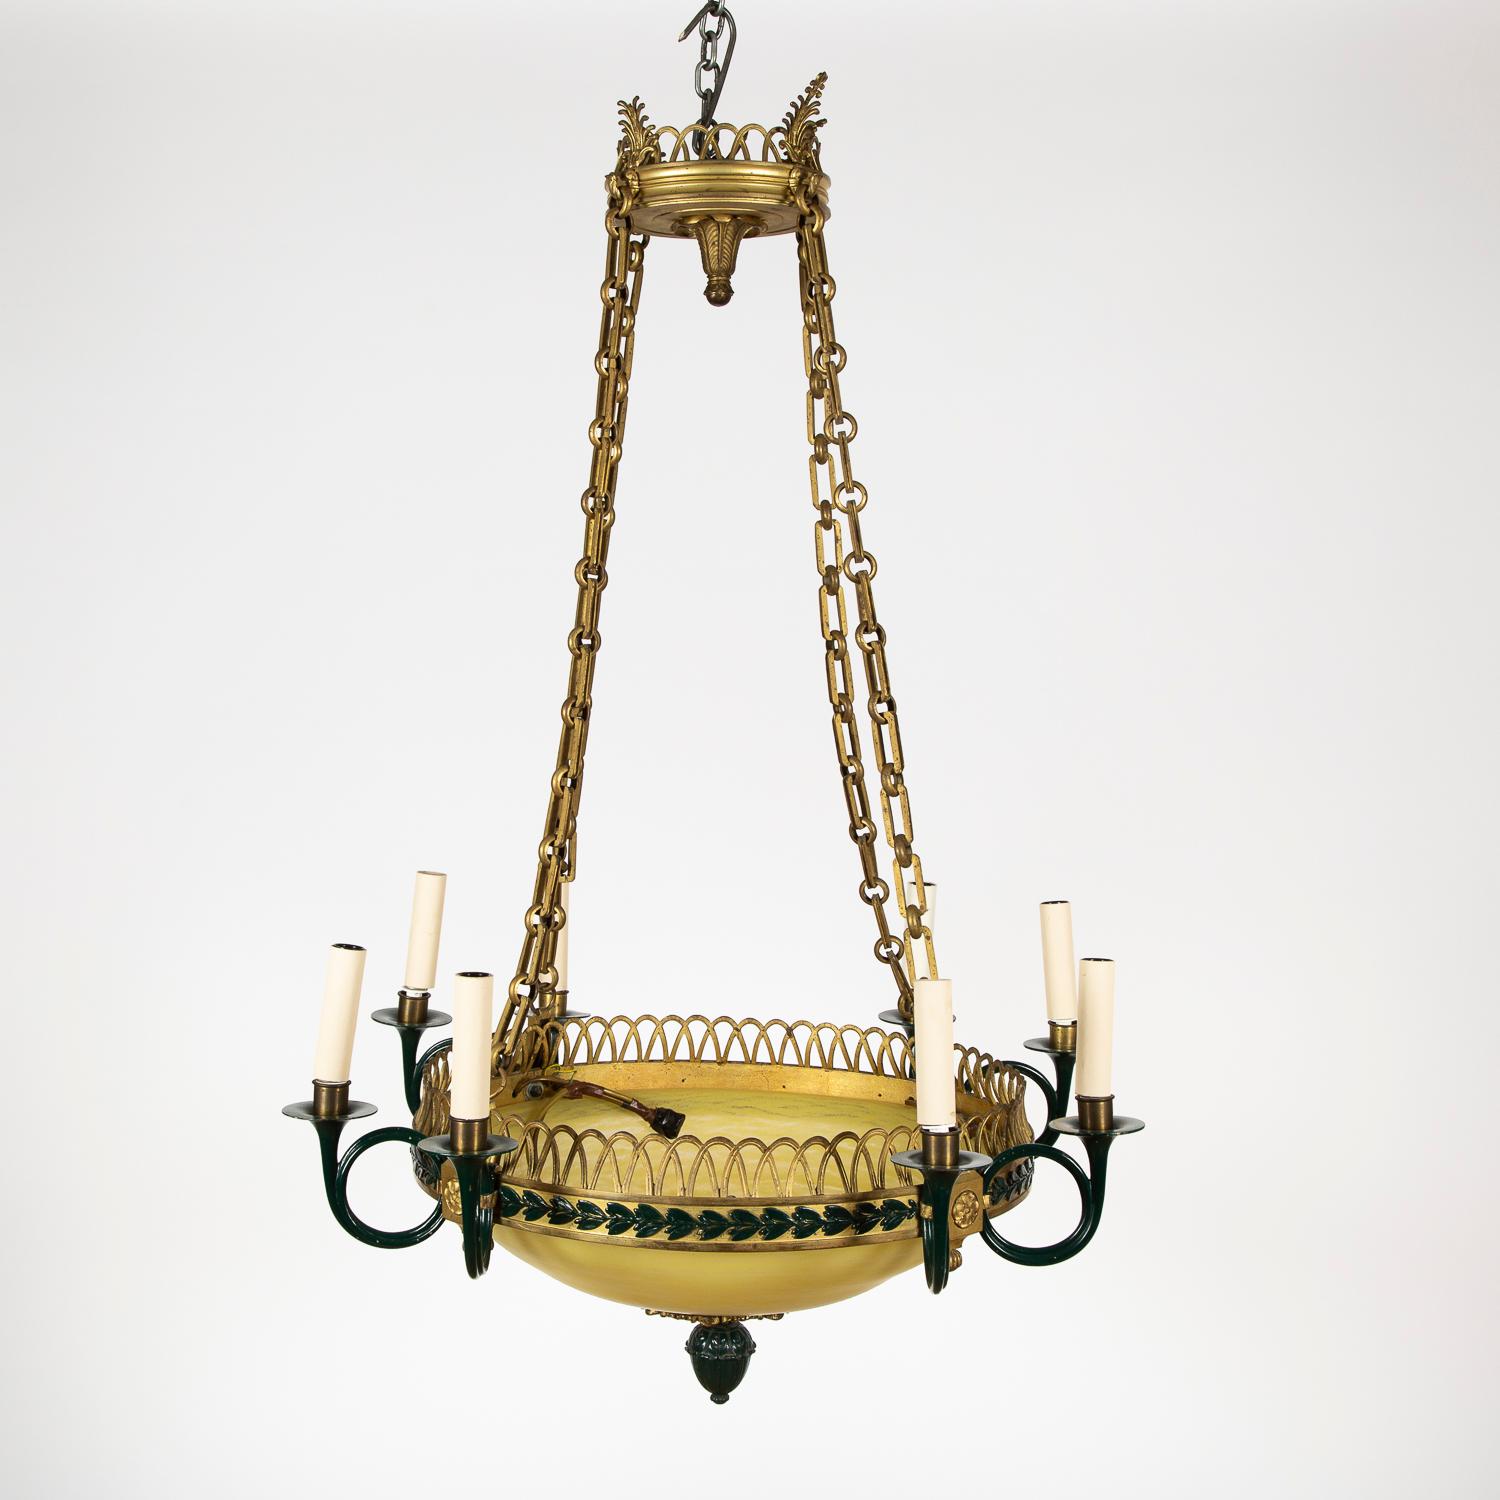 A French eight light gilt bronze and colored glass chandelier in the Empire style.

 